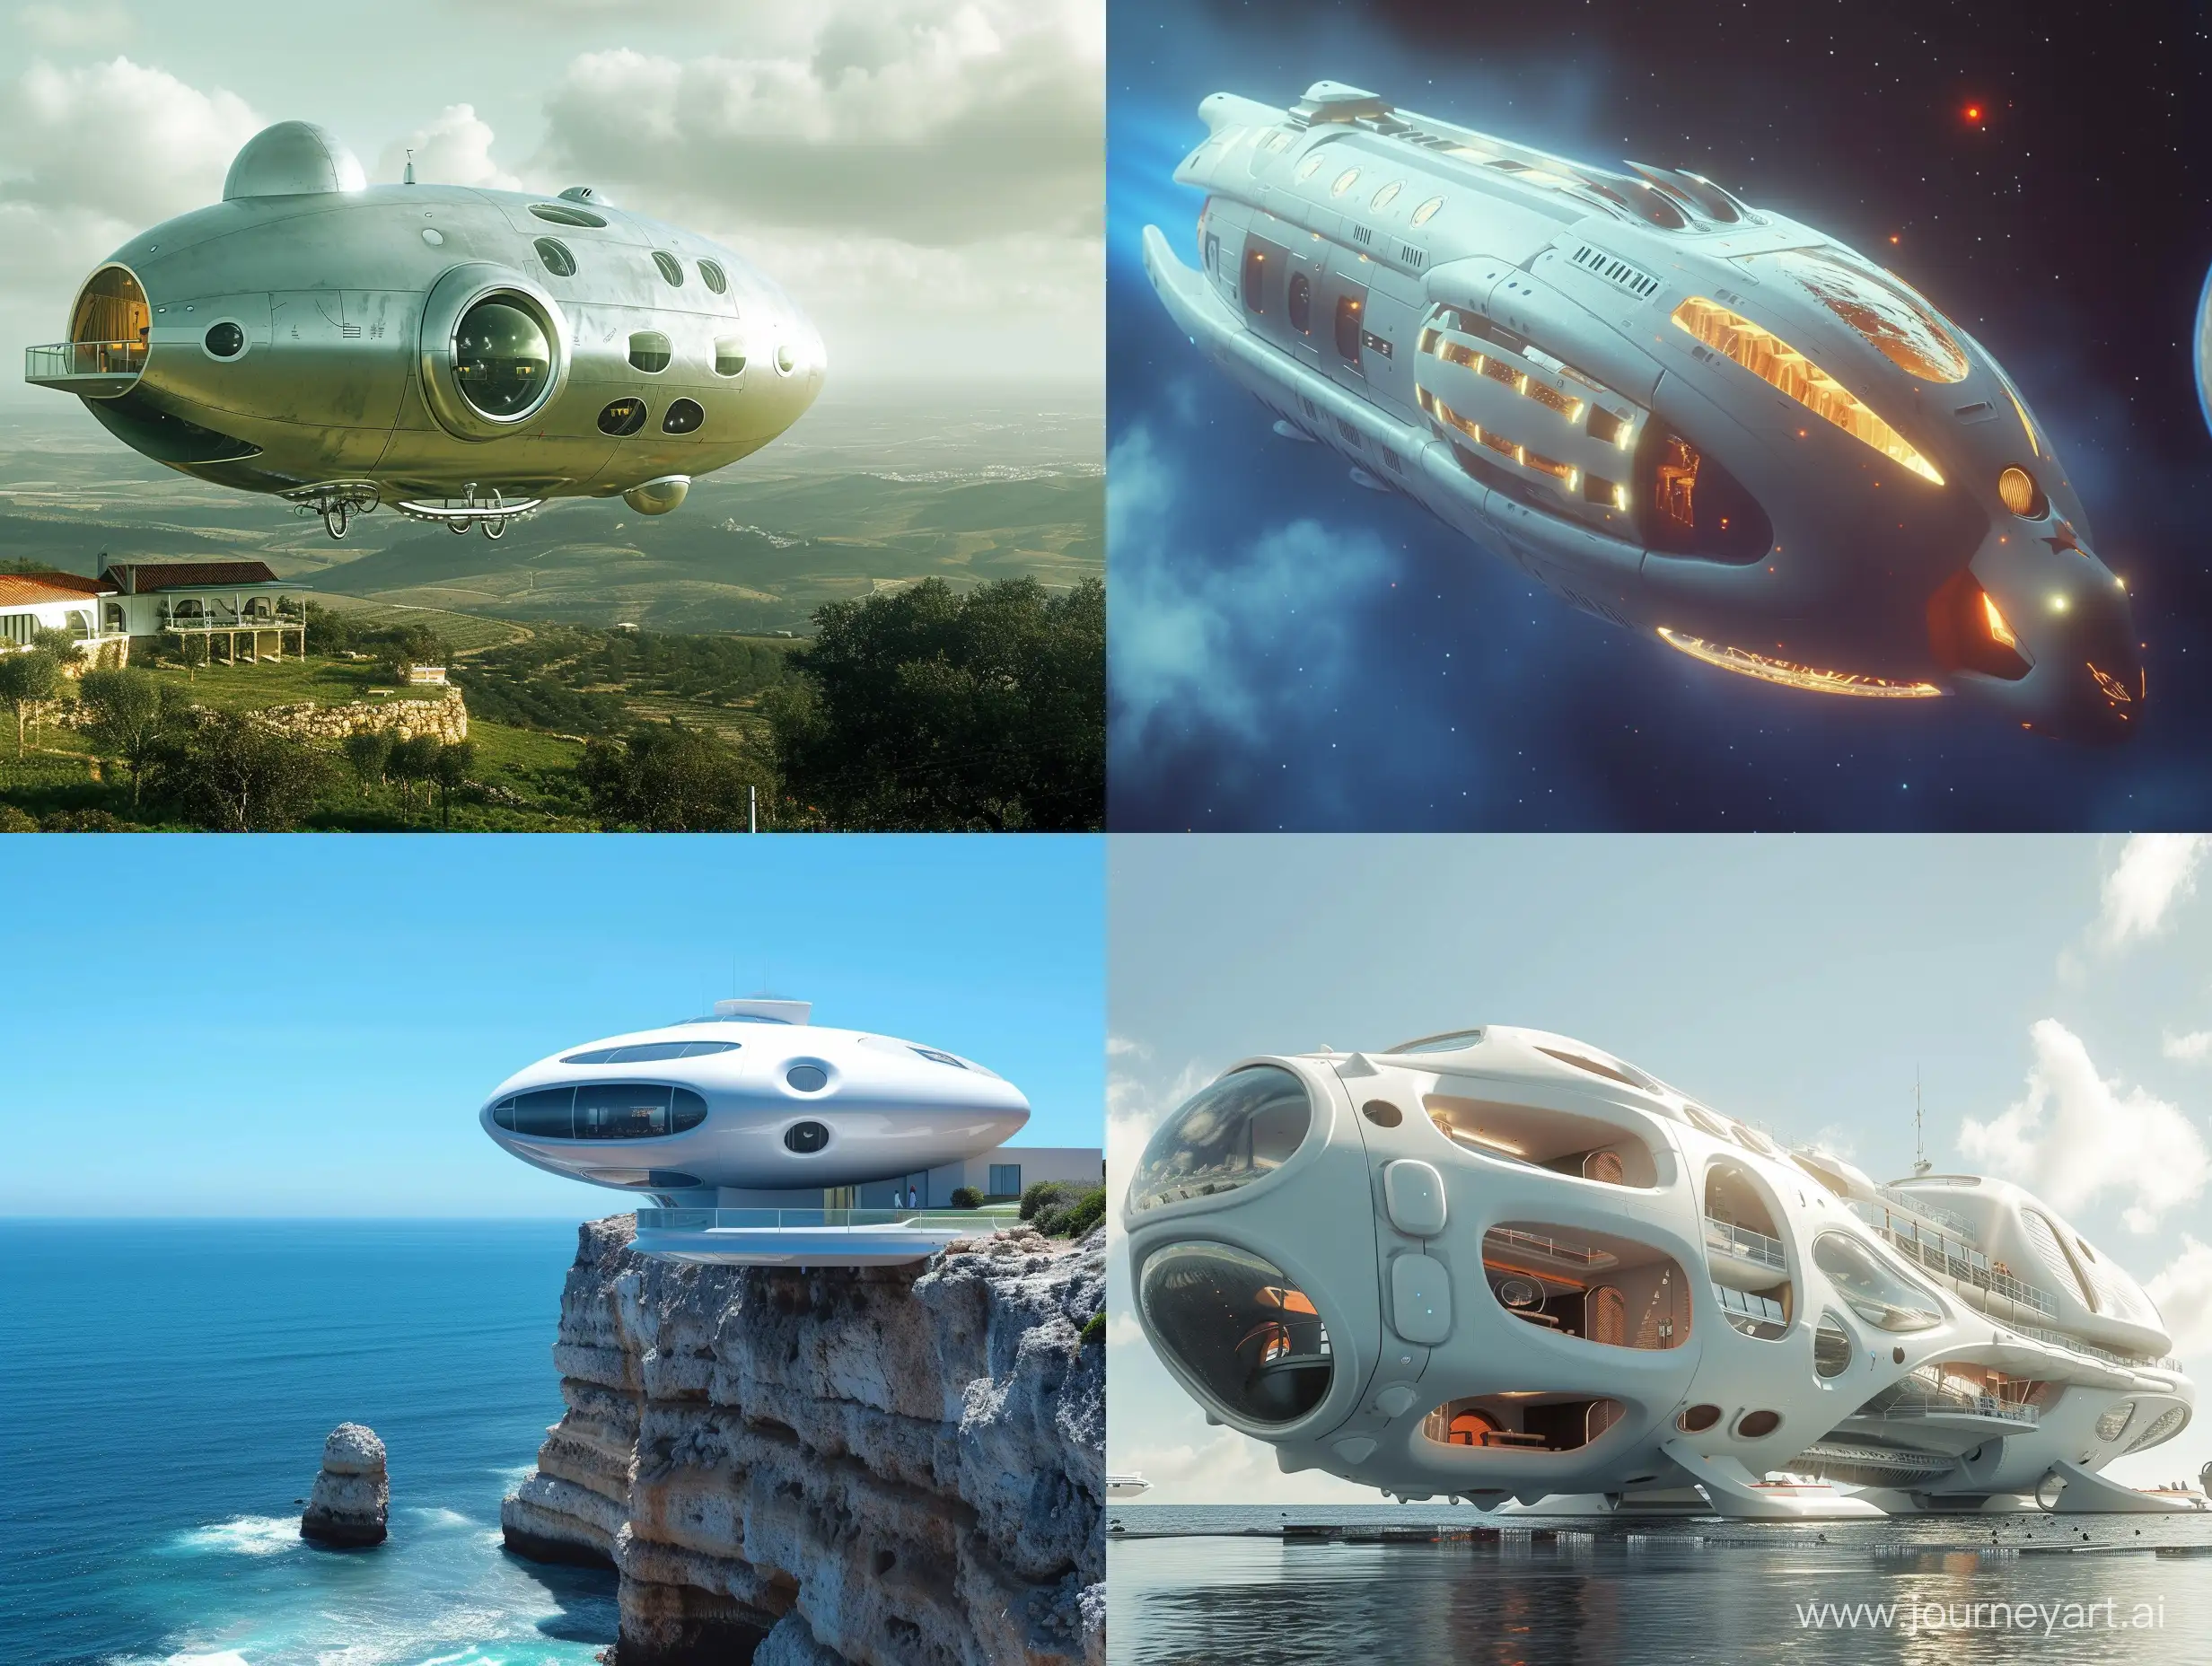 create a transition slide for a futuristic science fiction film festival. this is to present one of many films. the theme is called "future documentary" and the film in the category is about a futuristic love hotel in Portugal that looks like a space ship.